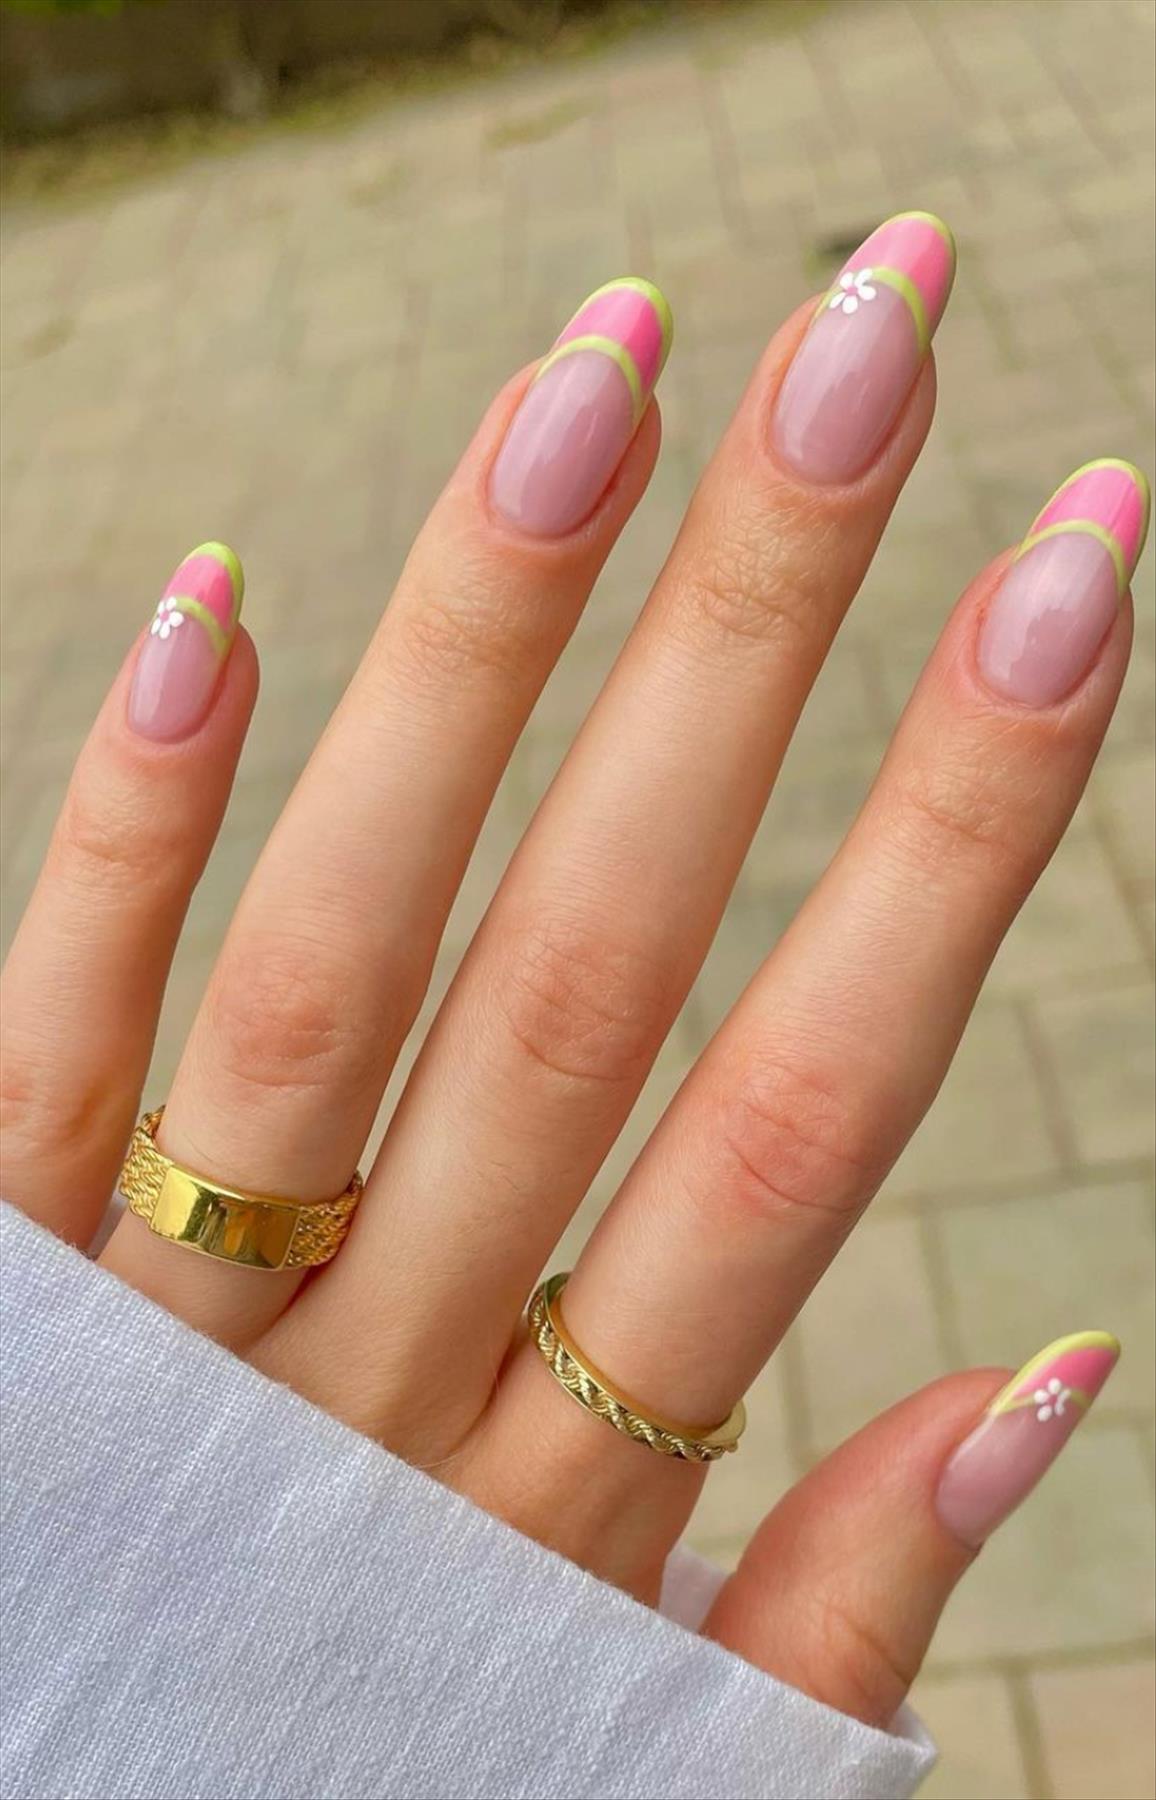 Elegant french tip nails for a unique look